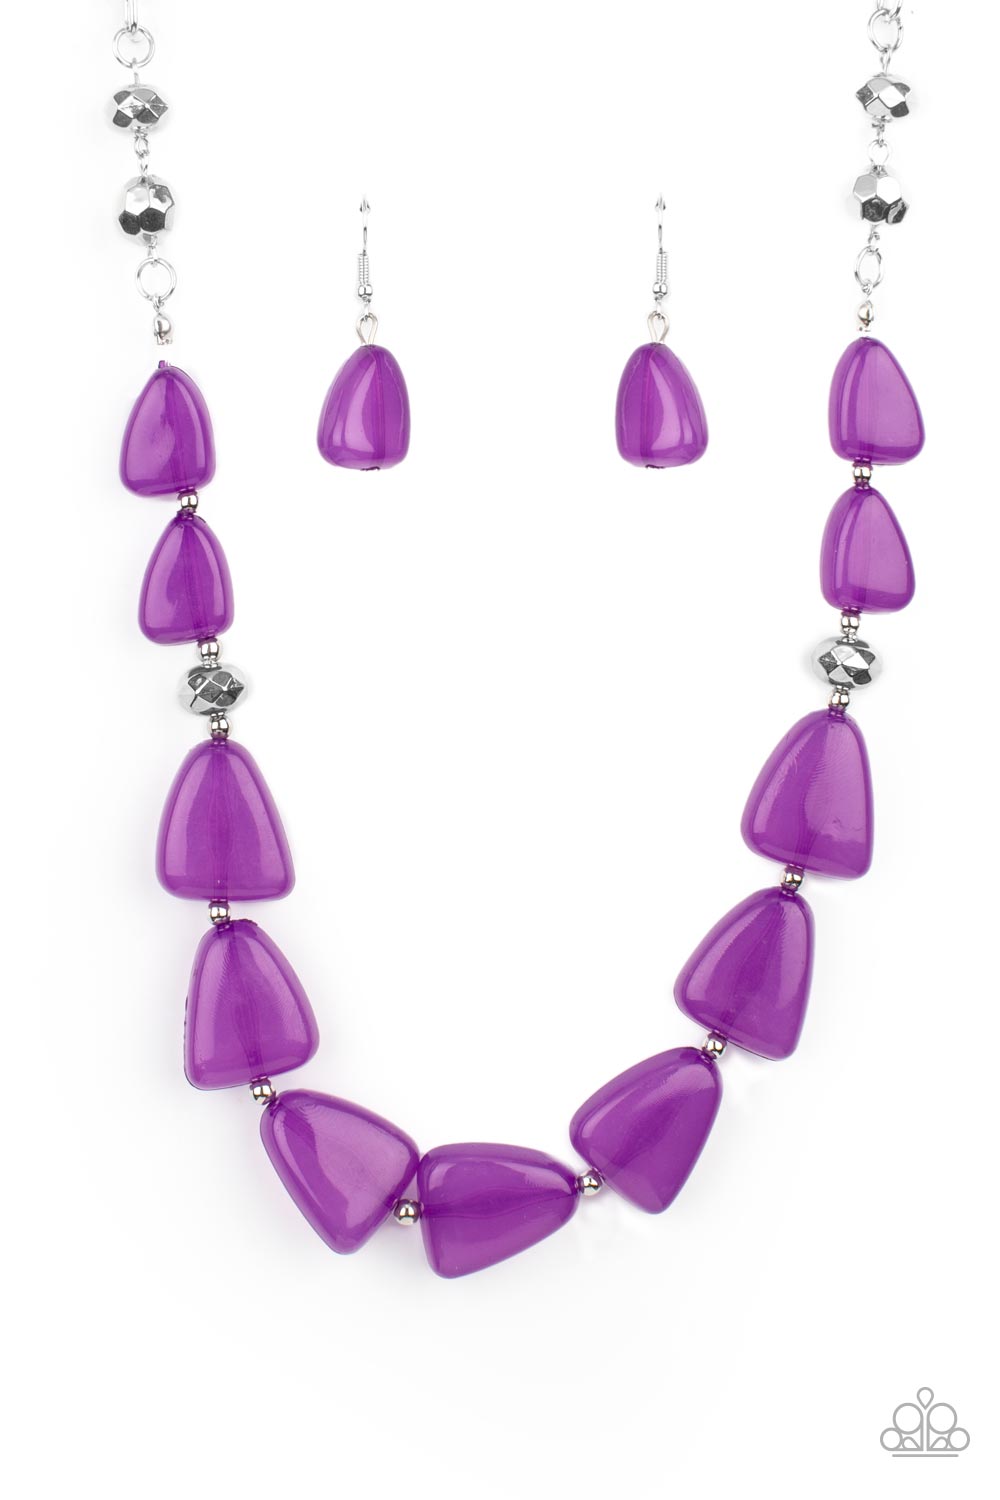 Tenaciously Tangy Purple Necklace - Paparazzi Accessories  Infused with dainty silver and faceted silver beads, imperfect triangular opaque purple beads are threaded along an invisible wire below the collar for a vivacious pop of color. Features an adjustable clasp closure.  Sold as one individual necklace. Includes one pair of matching earrings.